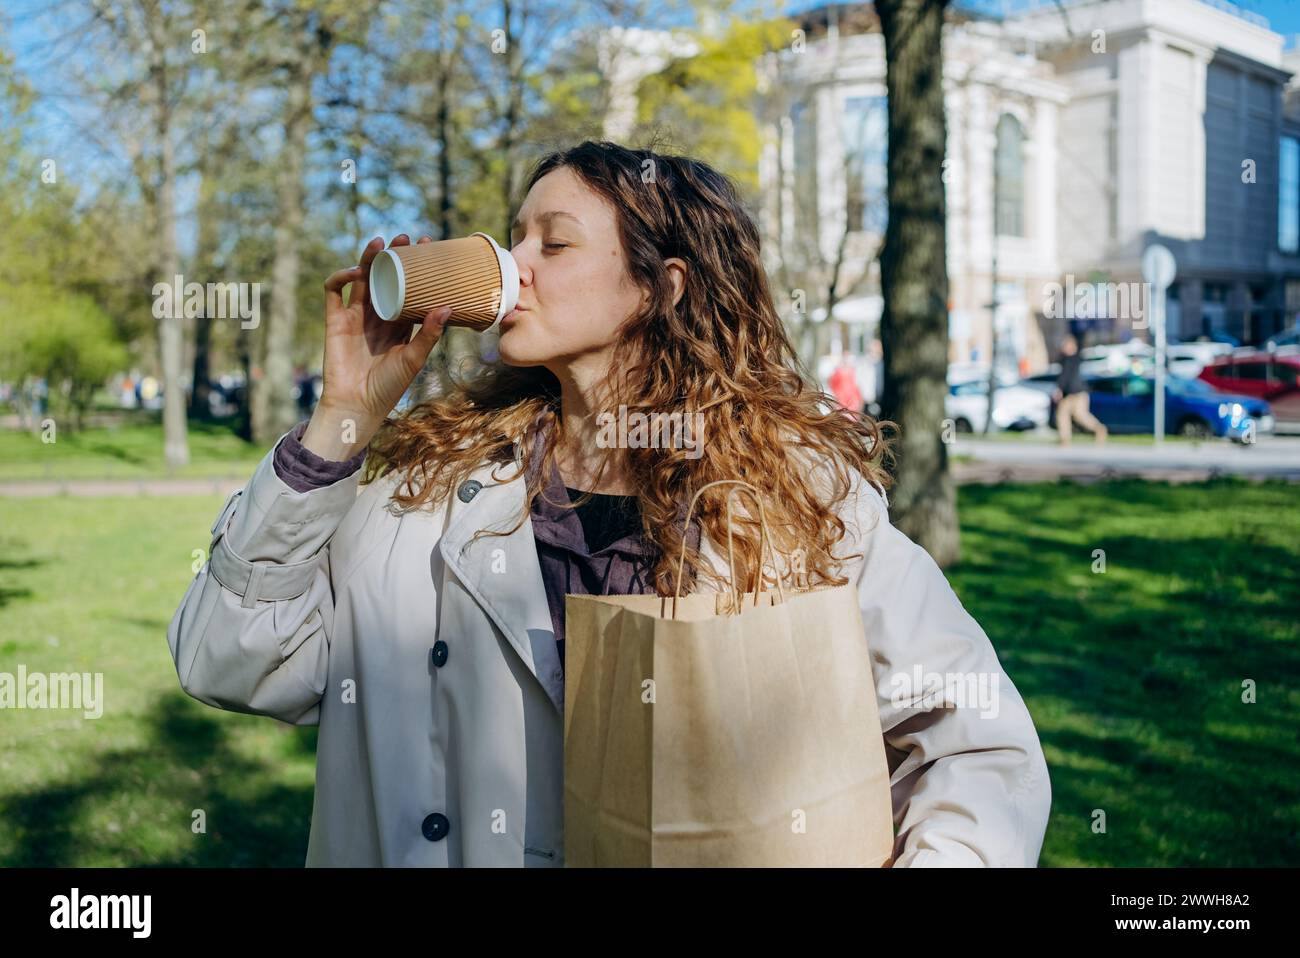 A woman savors her coffee from a takeaway cup while holding a shopping bag, relishing a sunny day in a vibrant city park. The woman bought lunch at a takeaway cafe in a craft paper bag. Stock Photo